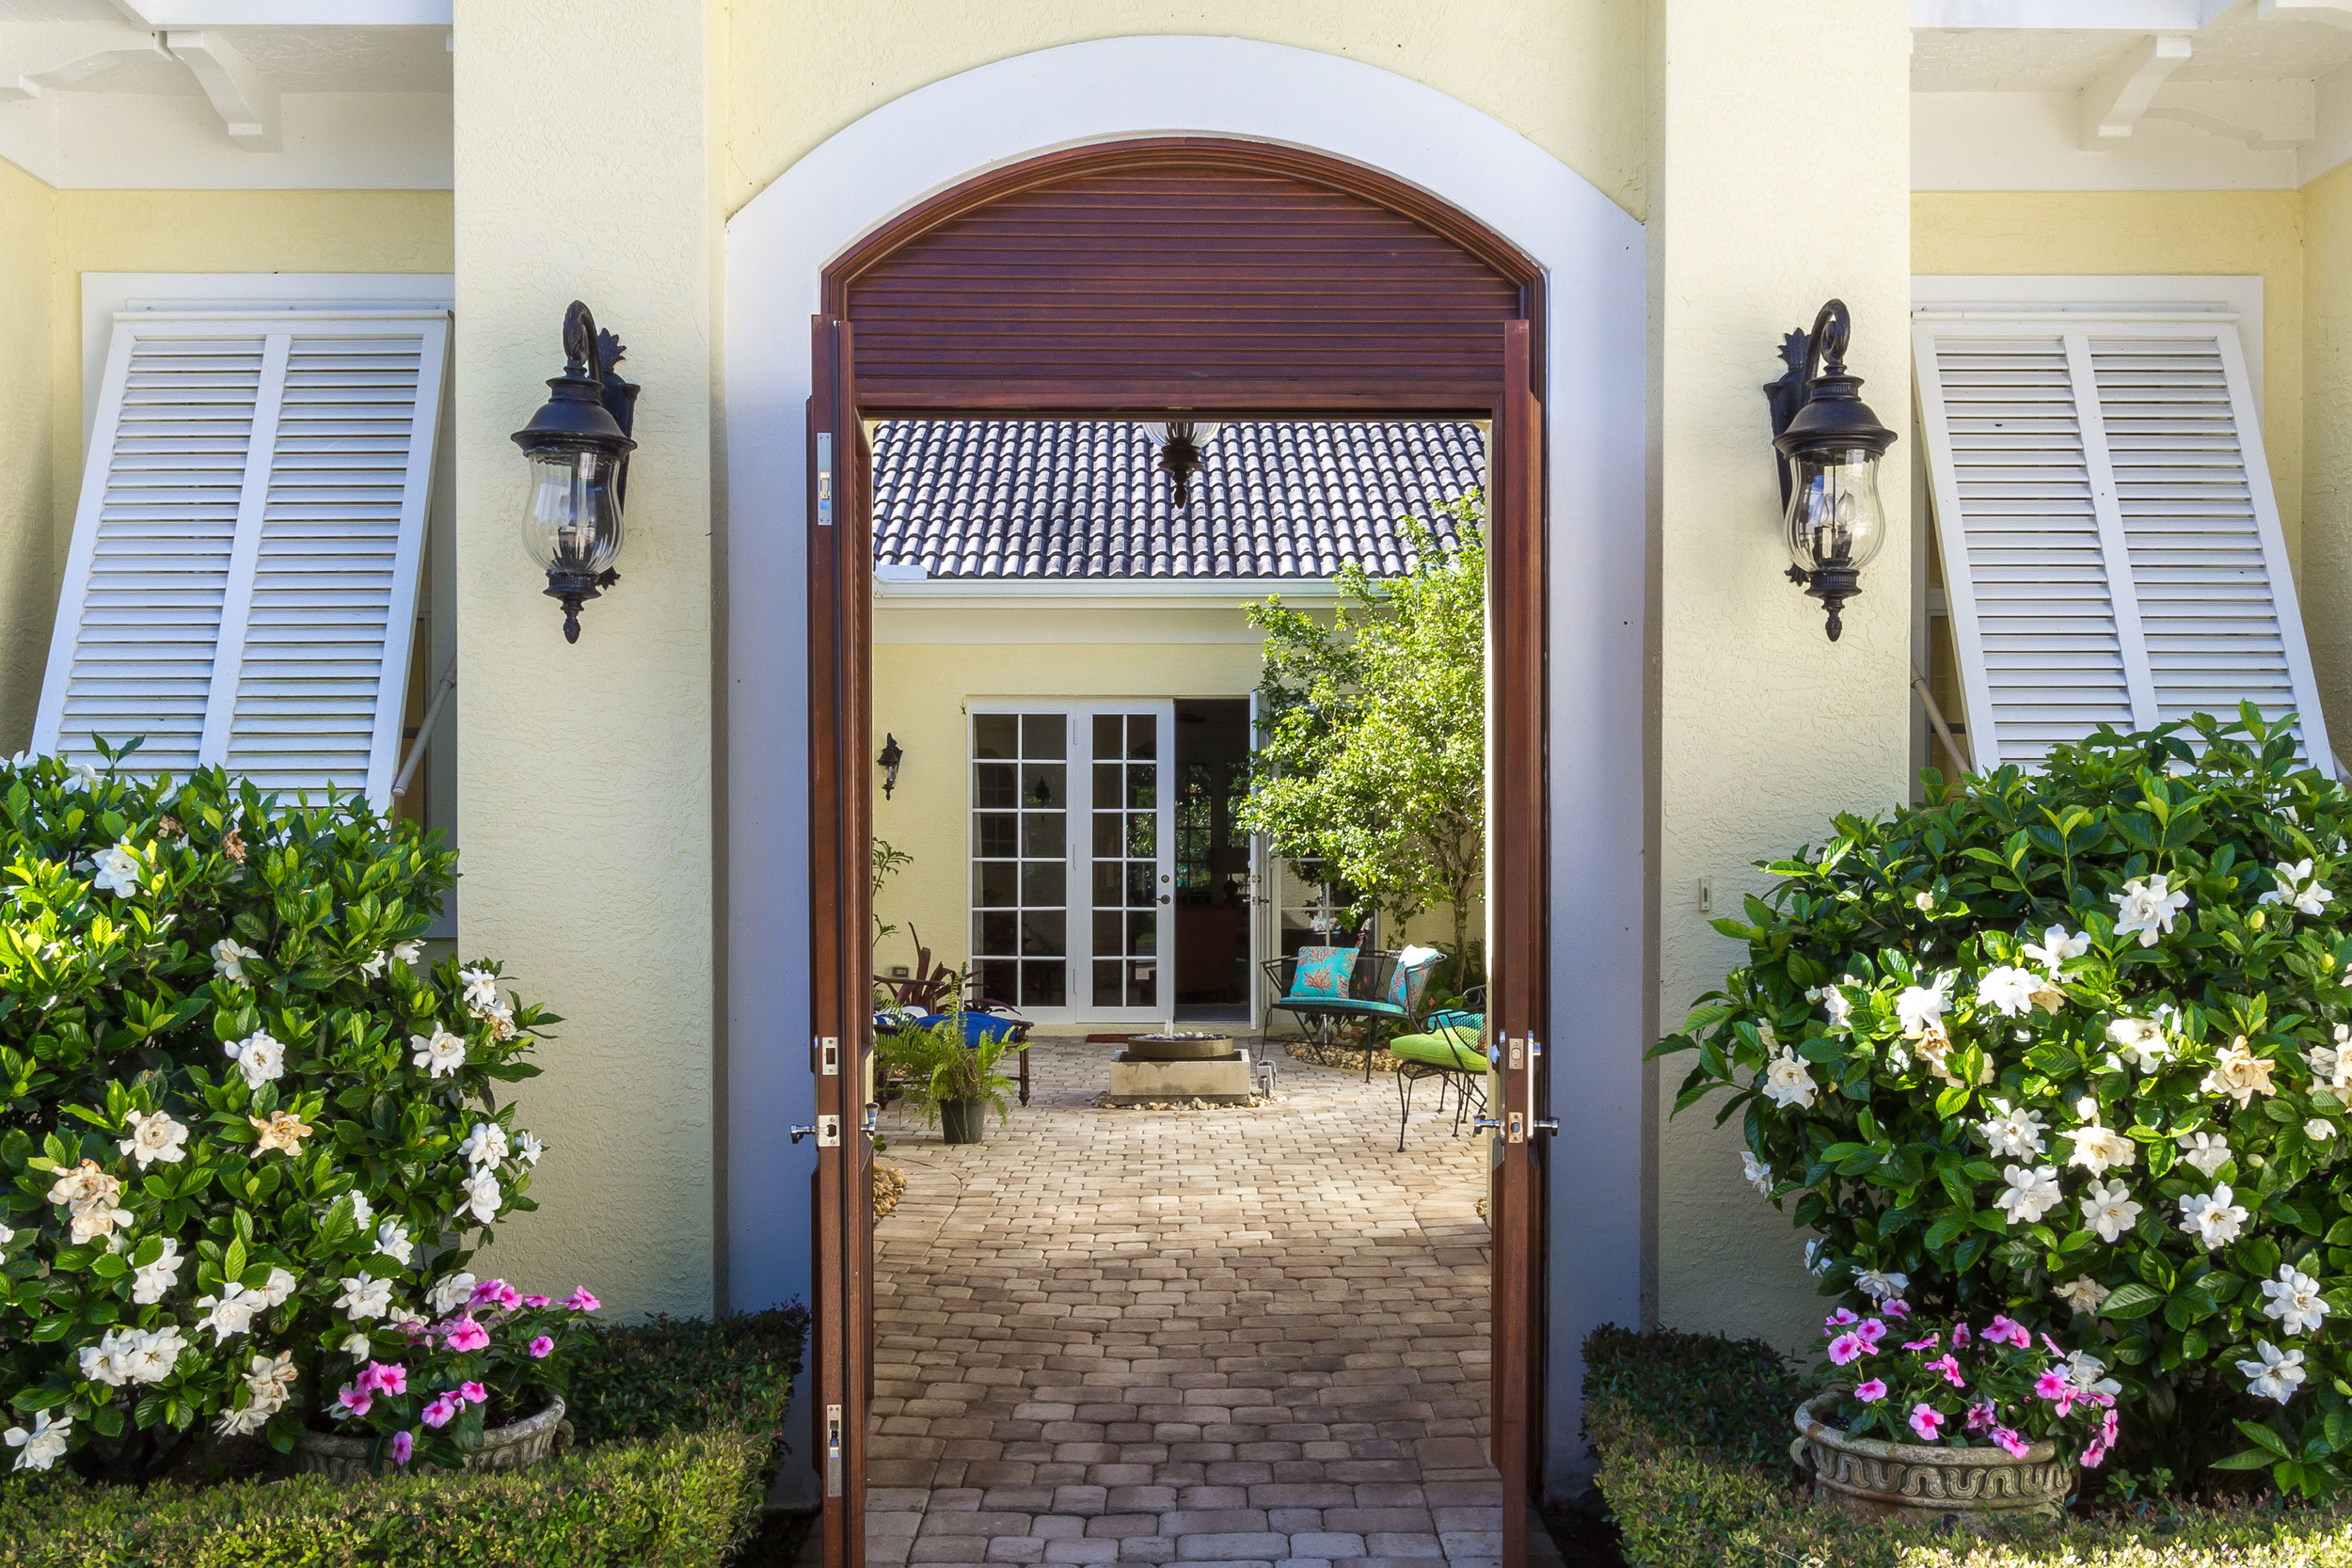 Courtyard entrance at the Estuary with arched doorway flanked by beautiful gardenias